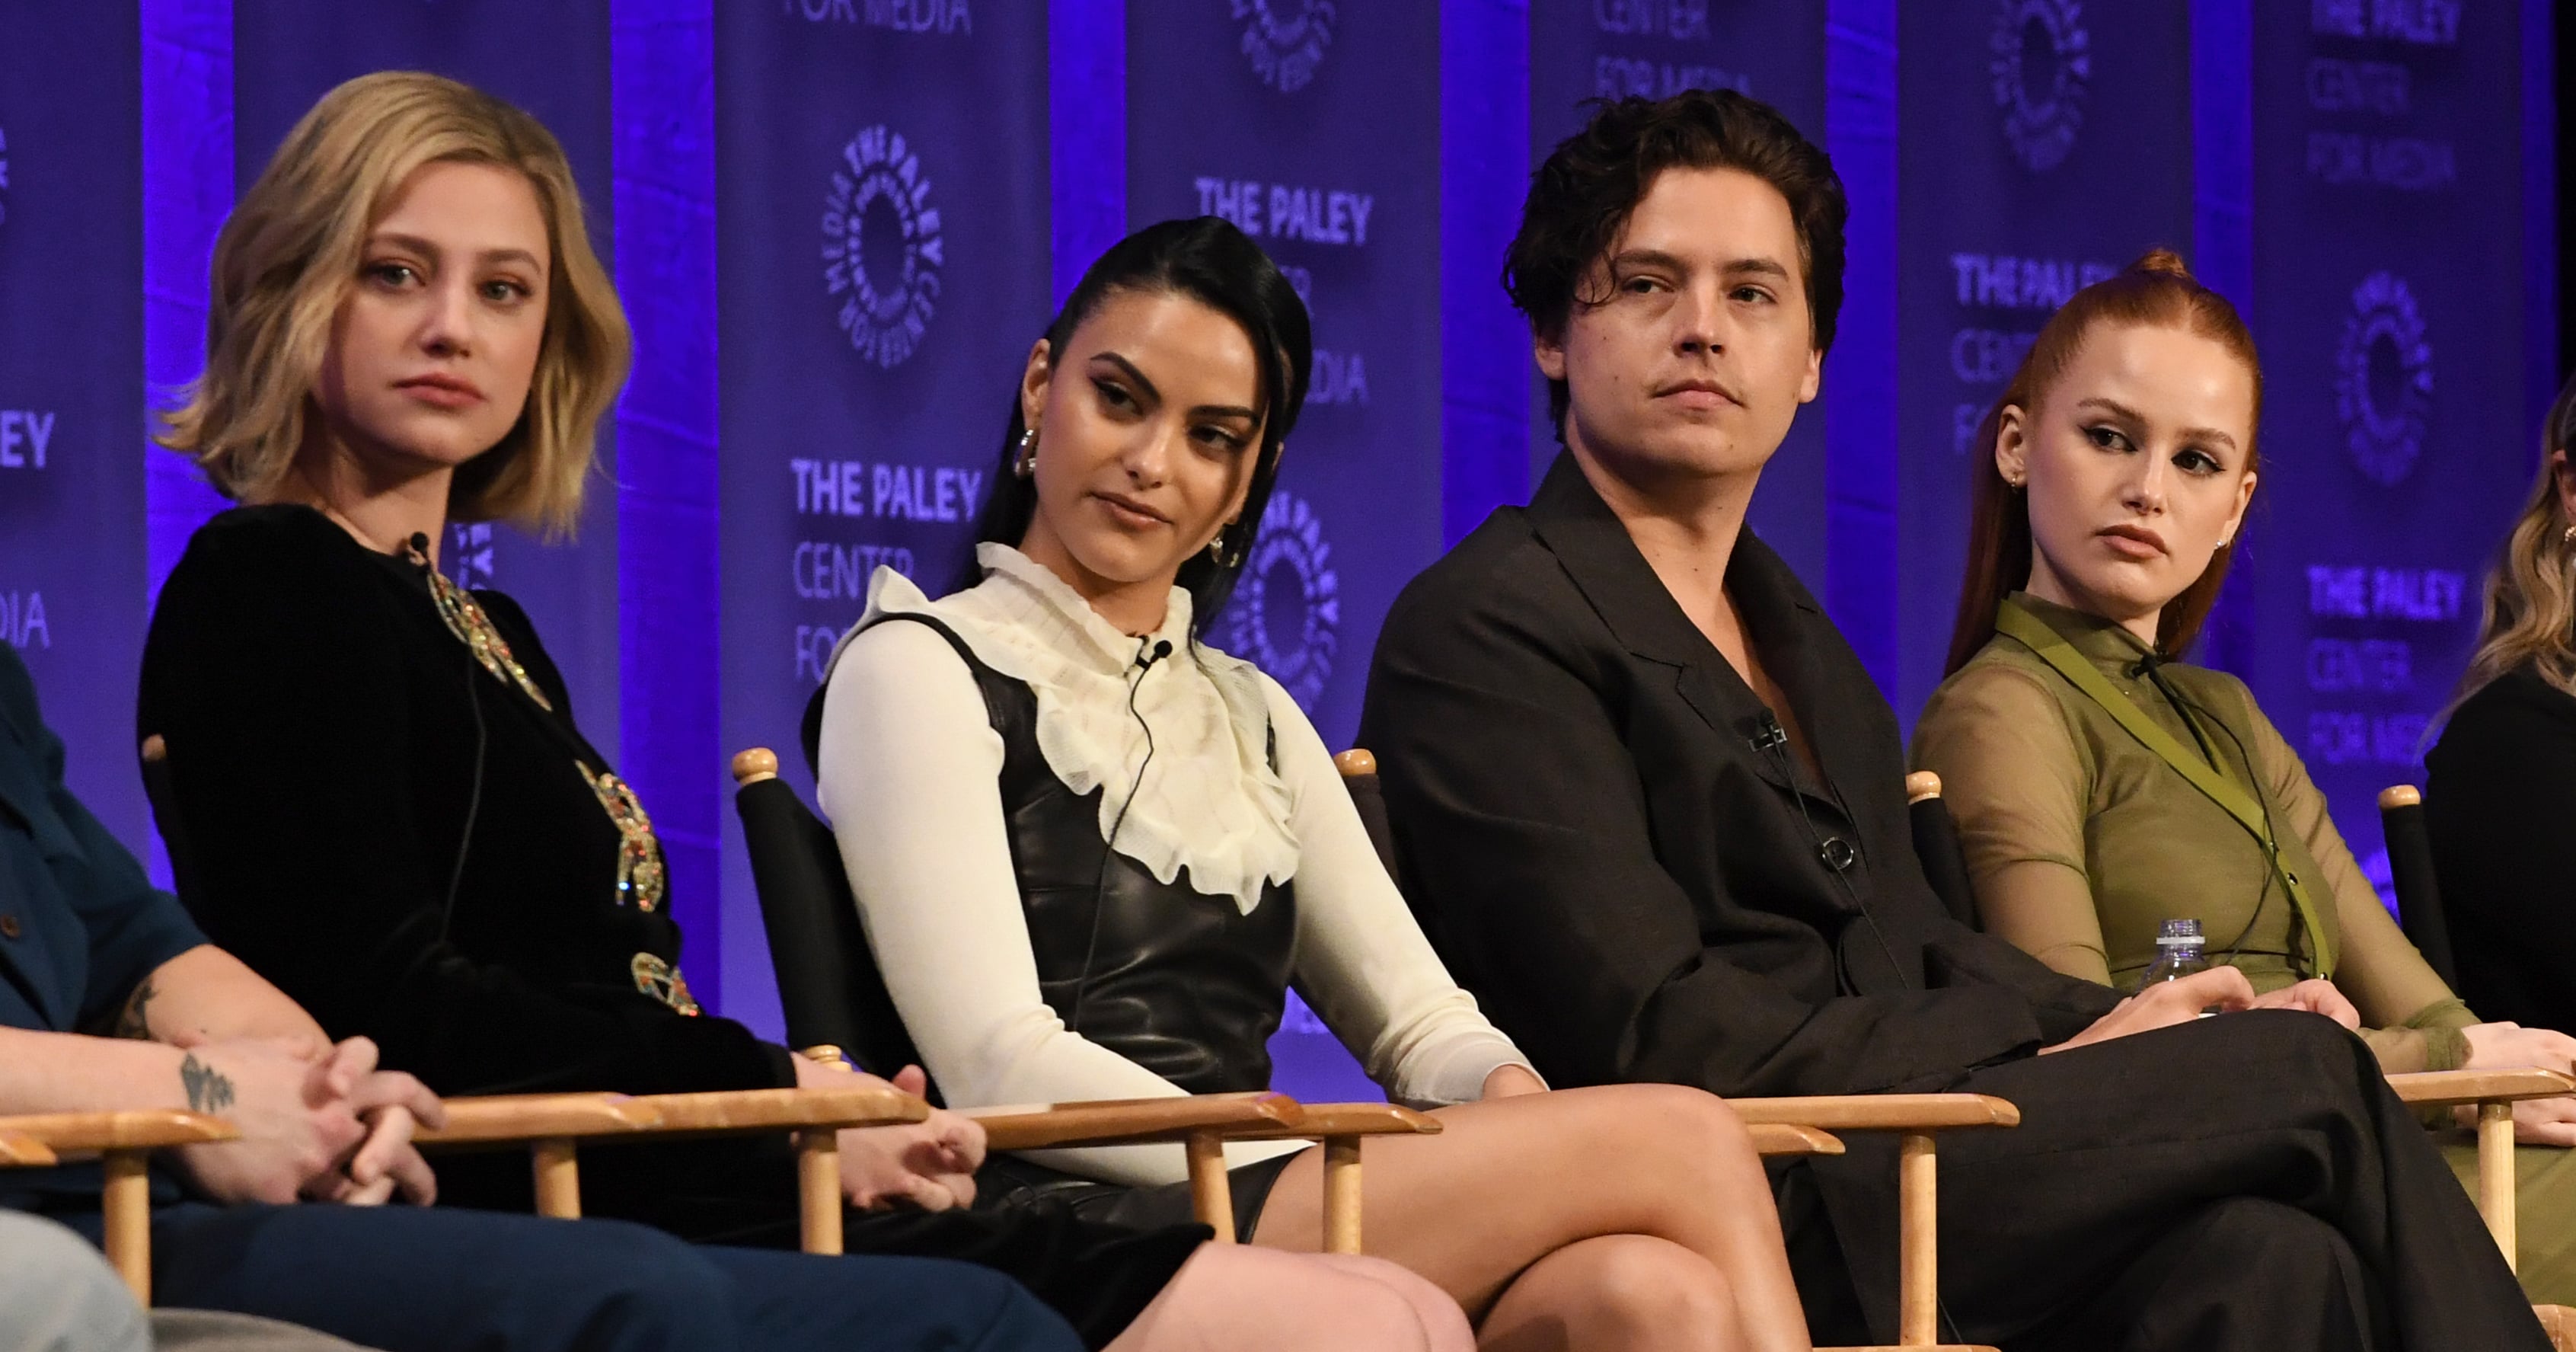 The “Riverdale” Cast Is Ready For the Internet to Laugh With Them, Not at Them